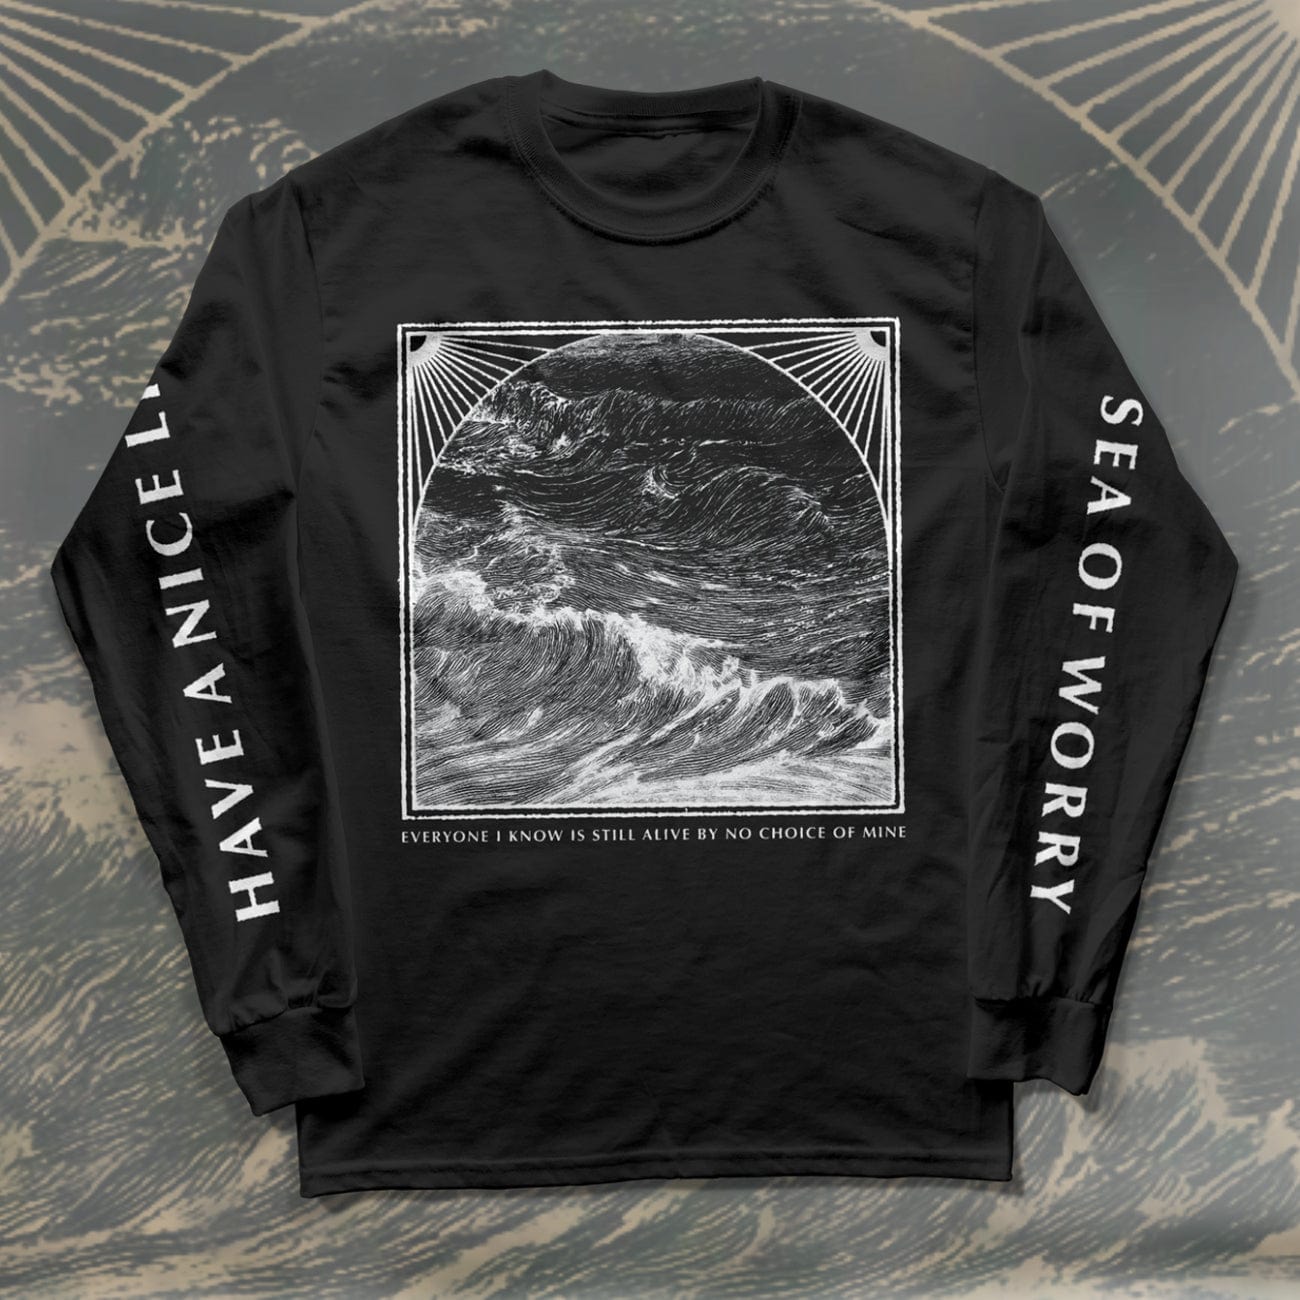 The Flenser Apparel Have a Nice Life "Sea of Worry" Longsleeve Shirt